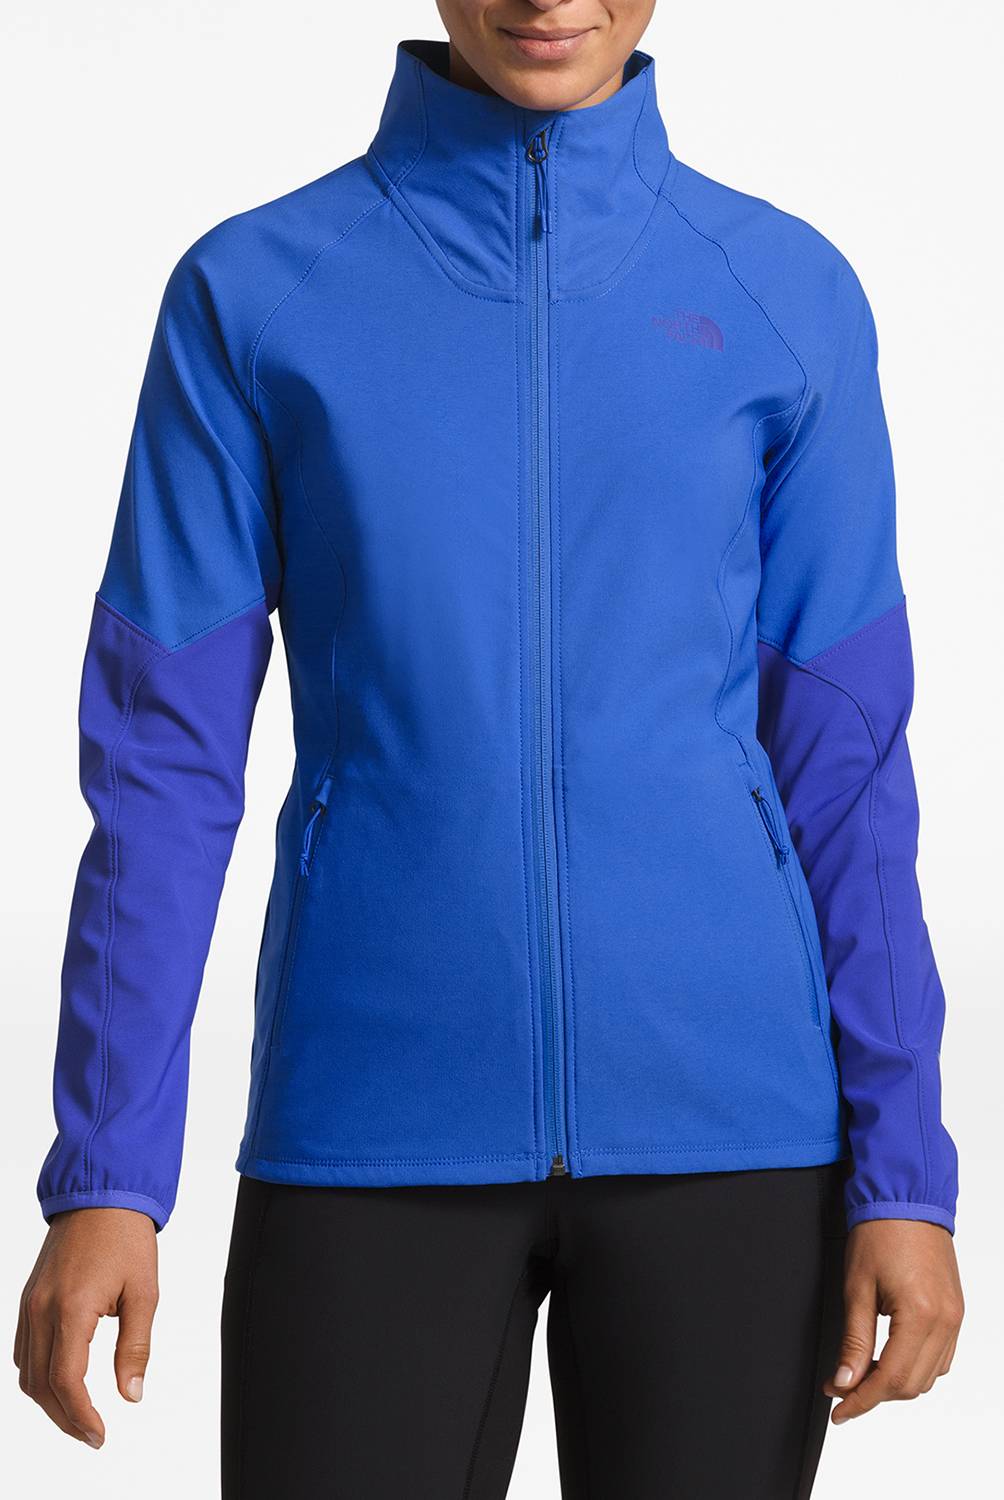 THE NORTH FACE - Chaqueta Mujer